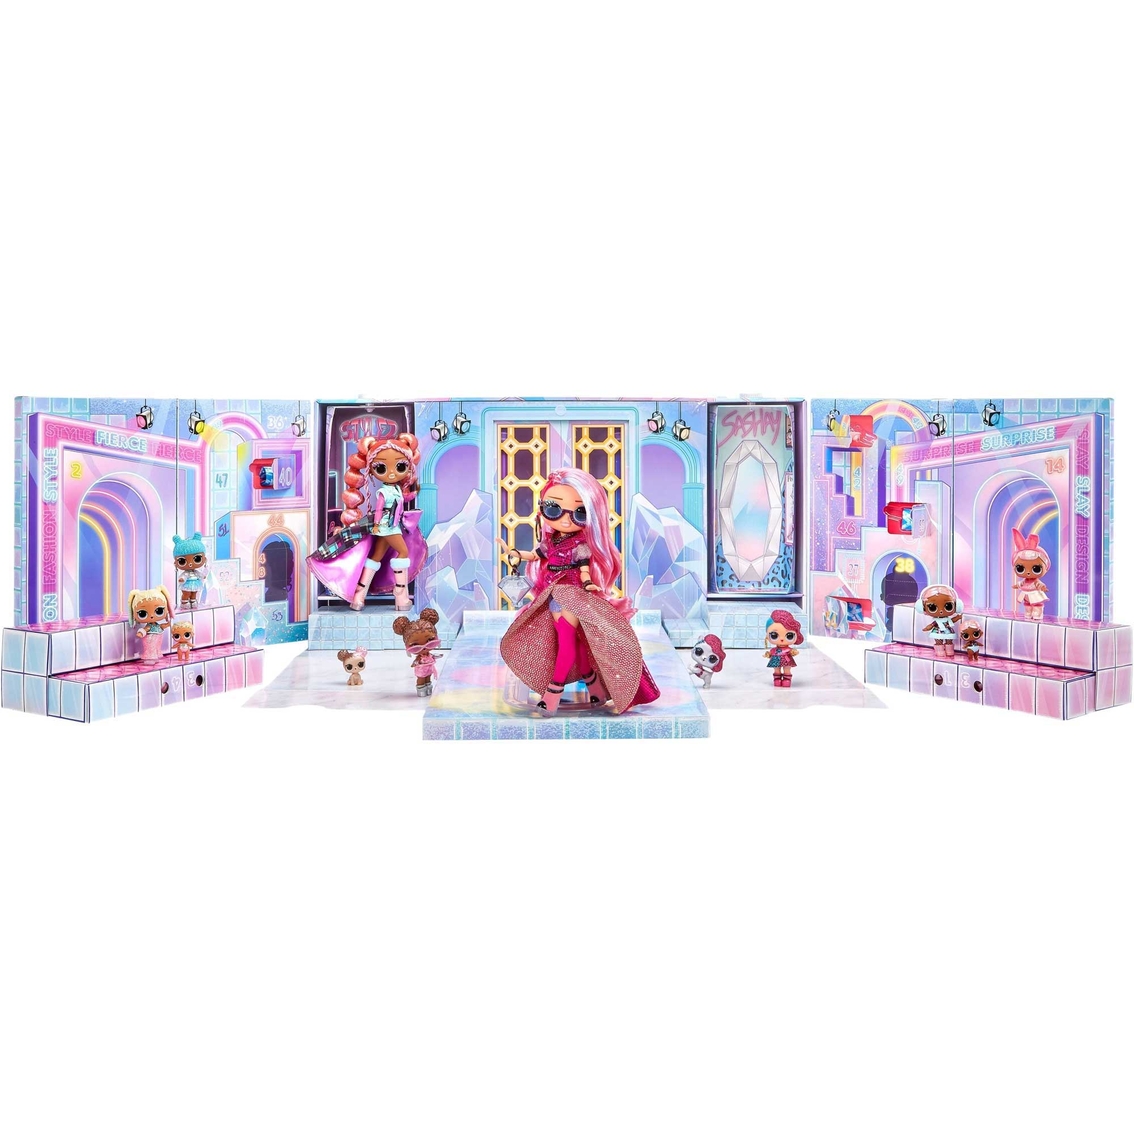 Lol Surprise Omg Fashion Show Mega Runway Playset With 12 Exclusive Dolls, Dolls, Baby & Toys